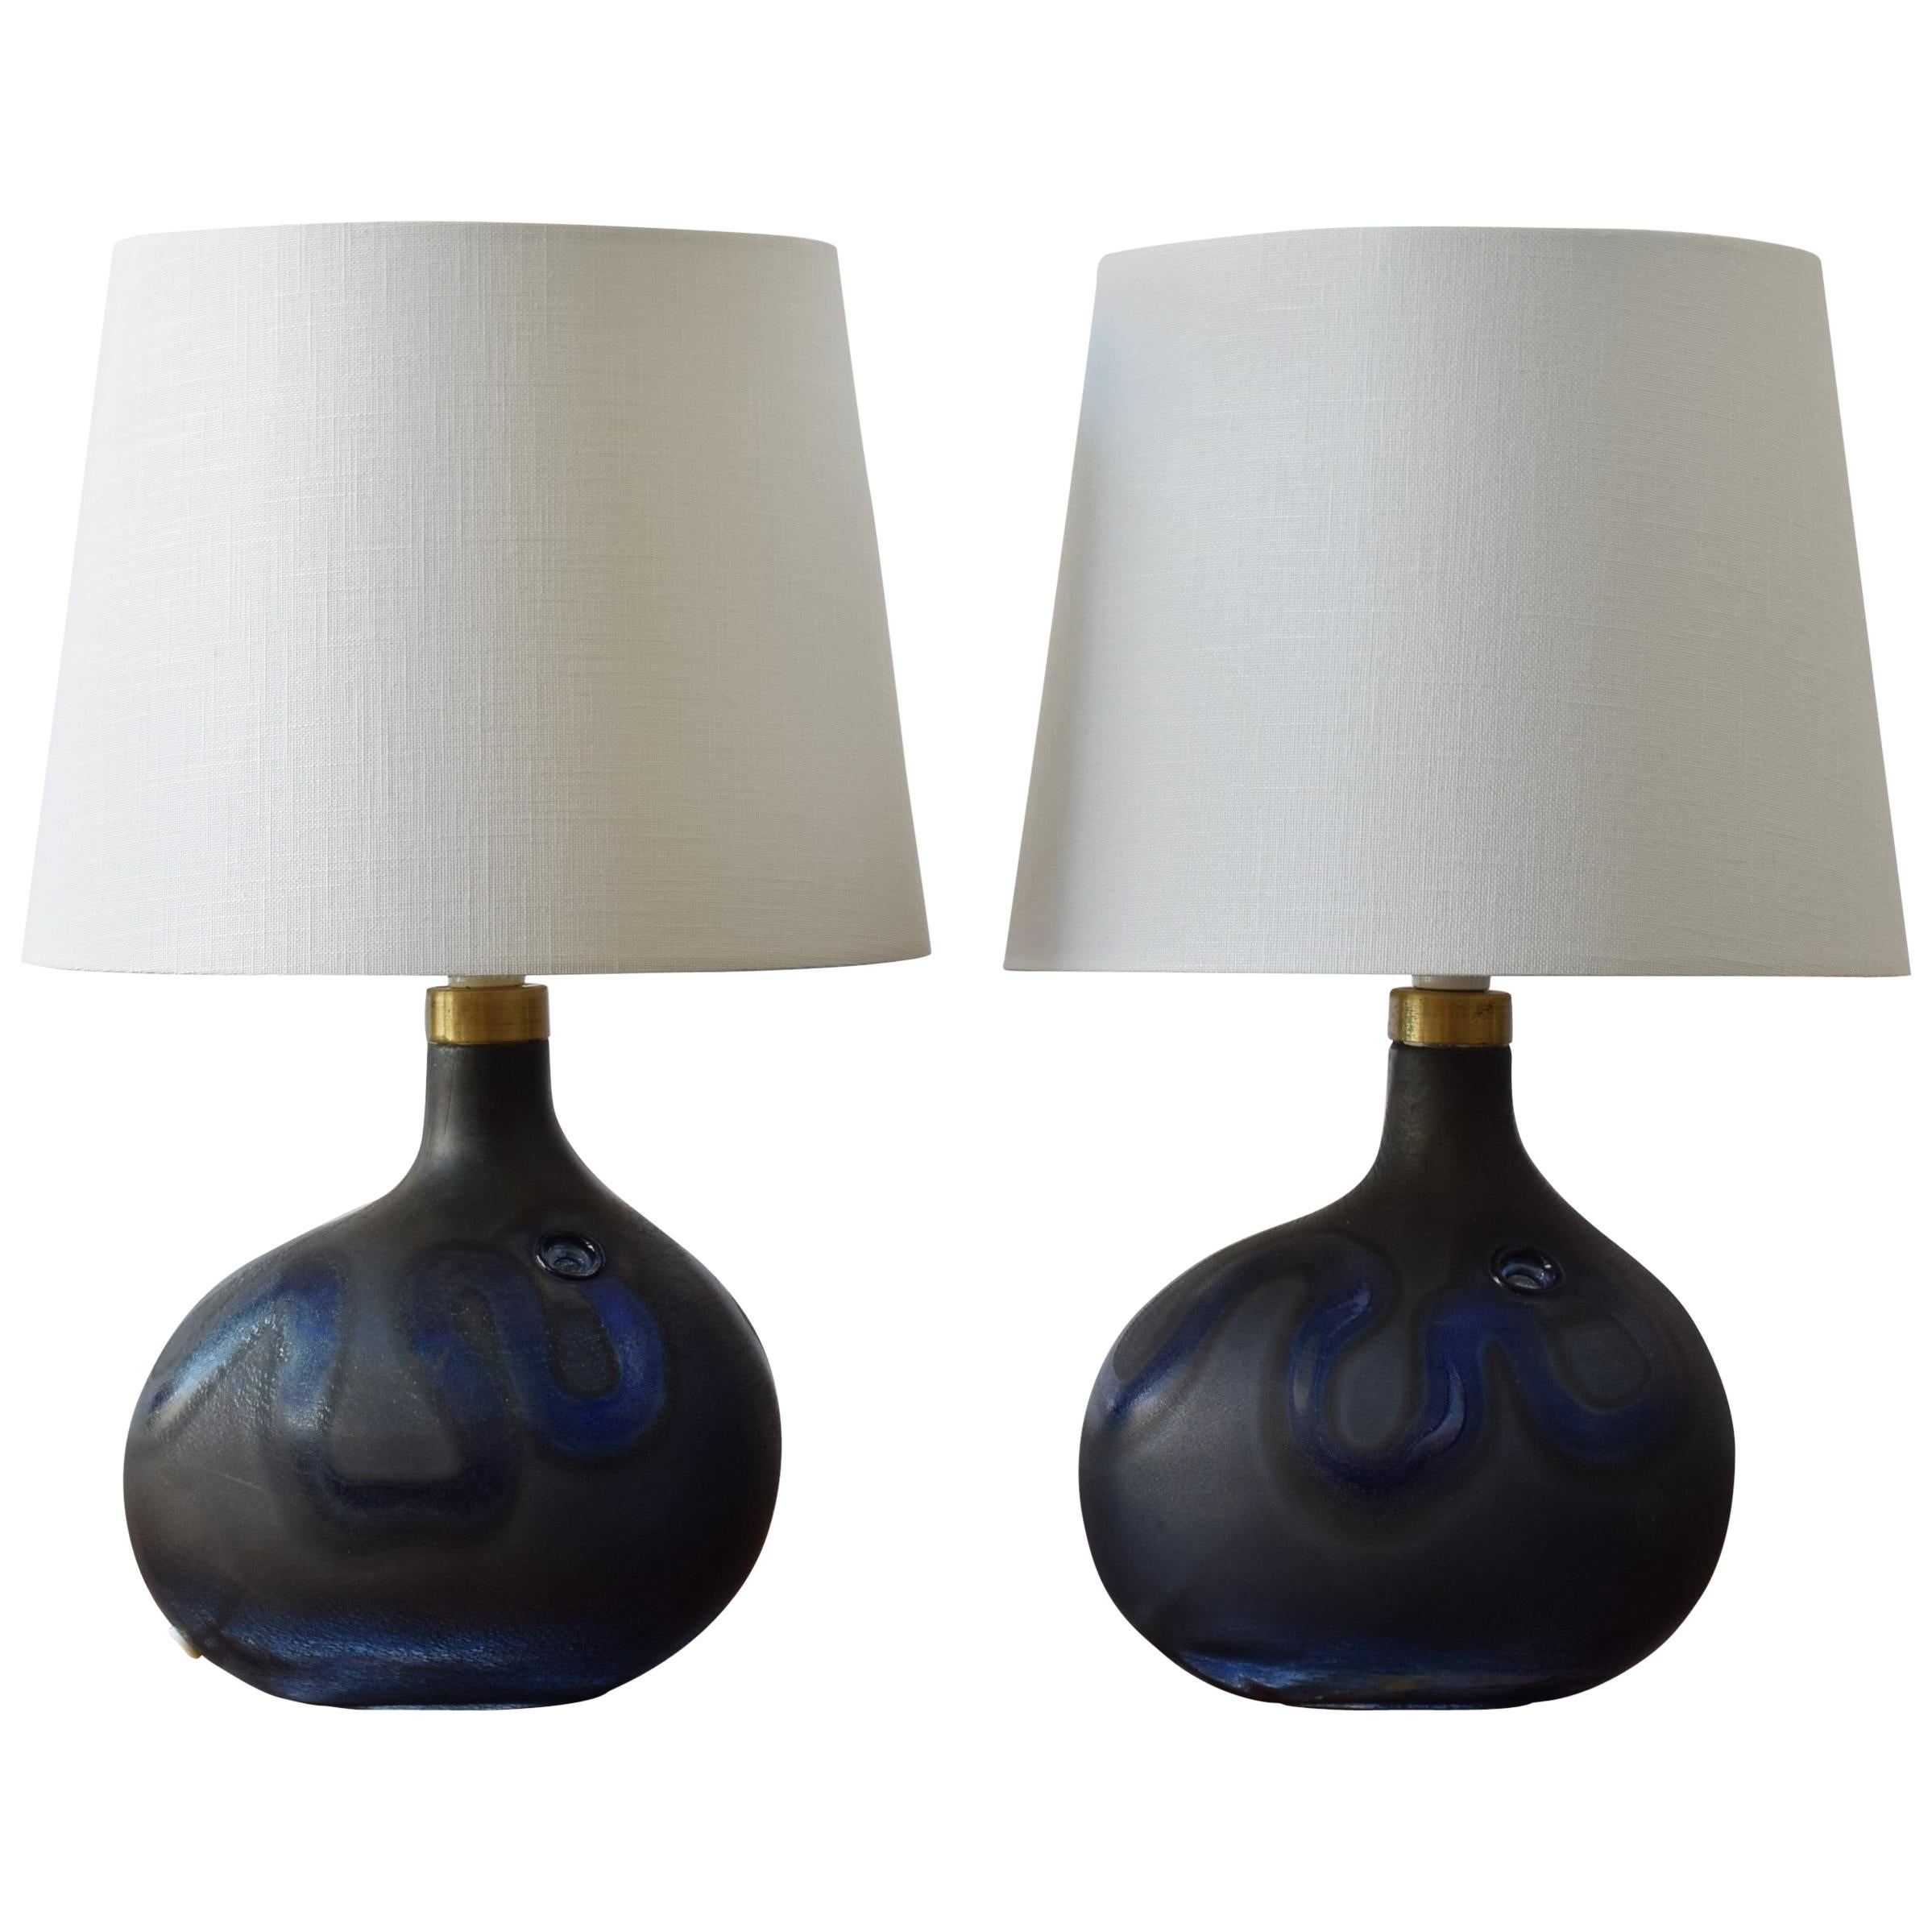 Michael Bang for Holmegaard Pair of Dark Blue Sculptural Glass Table Lamps 1970s